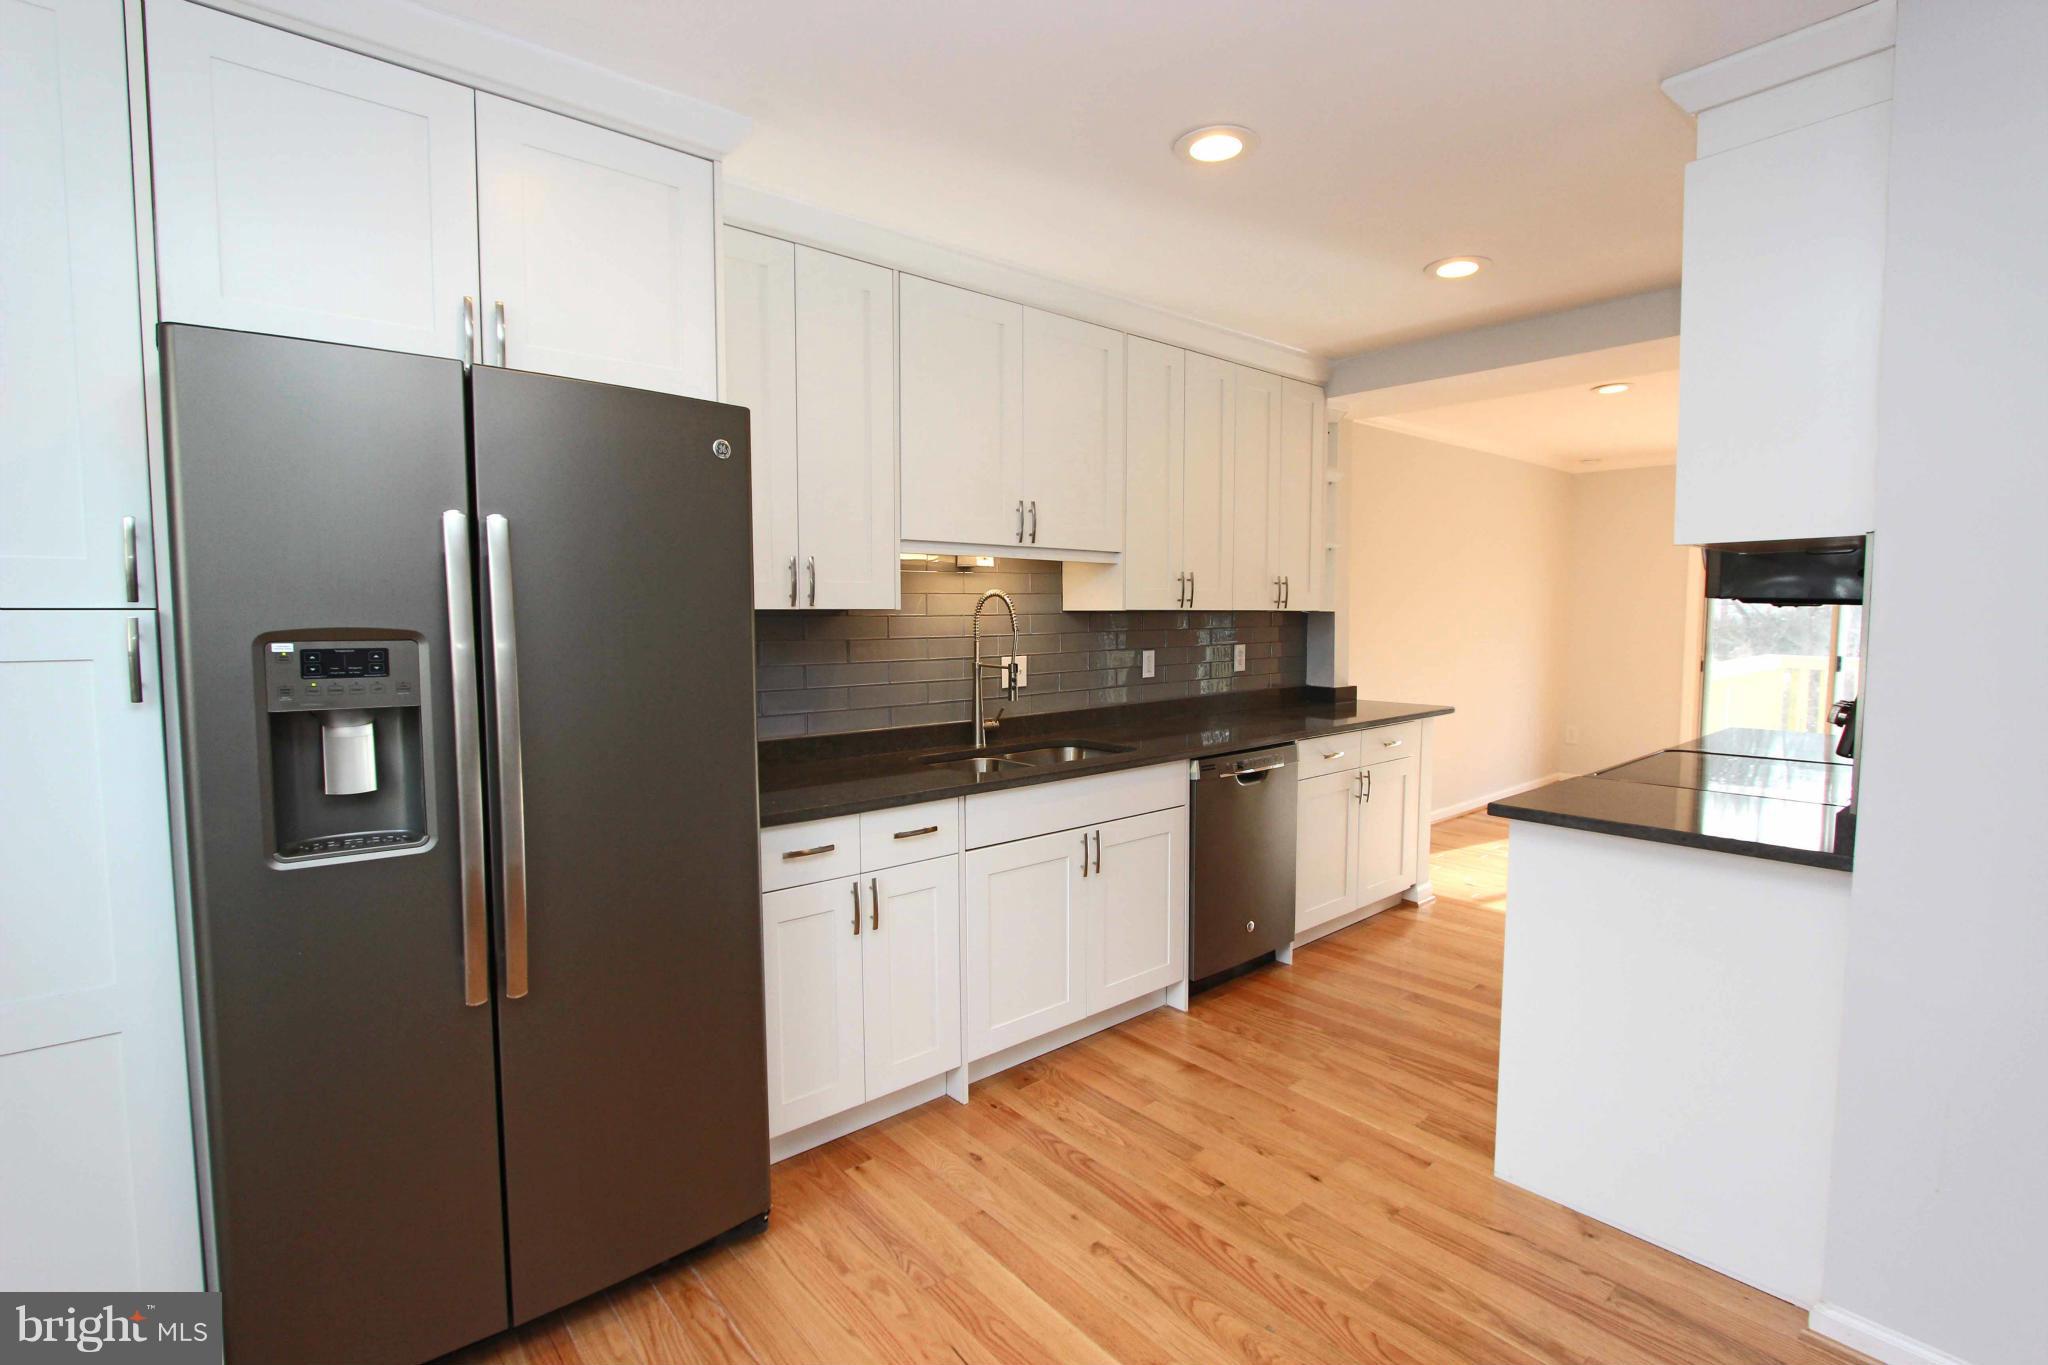 a kitchen with stainless steel appliances kitchen island granite countertop a refrigerator a sink and a stove